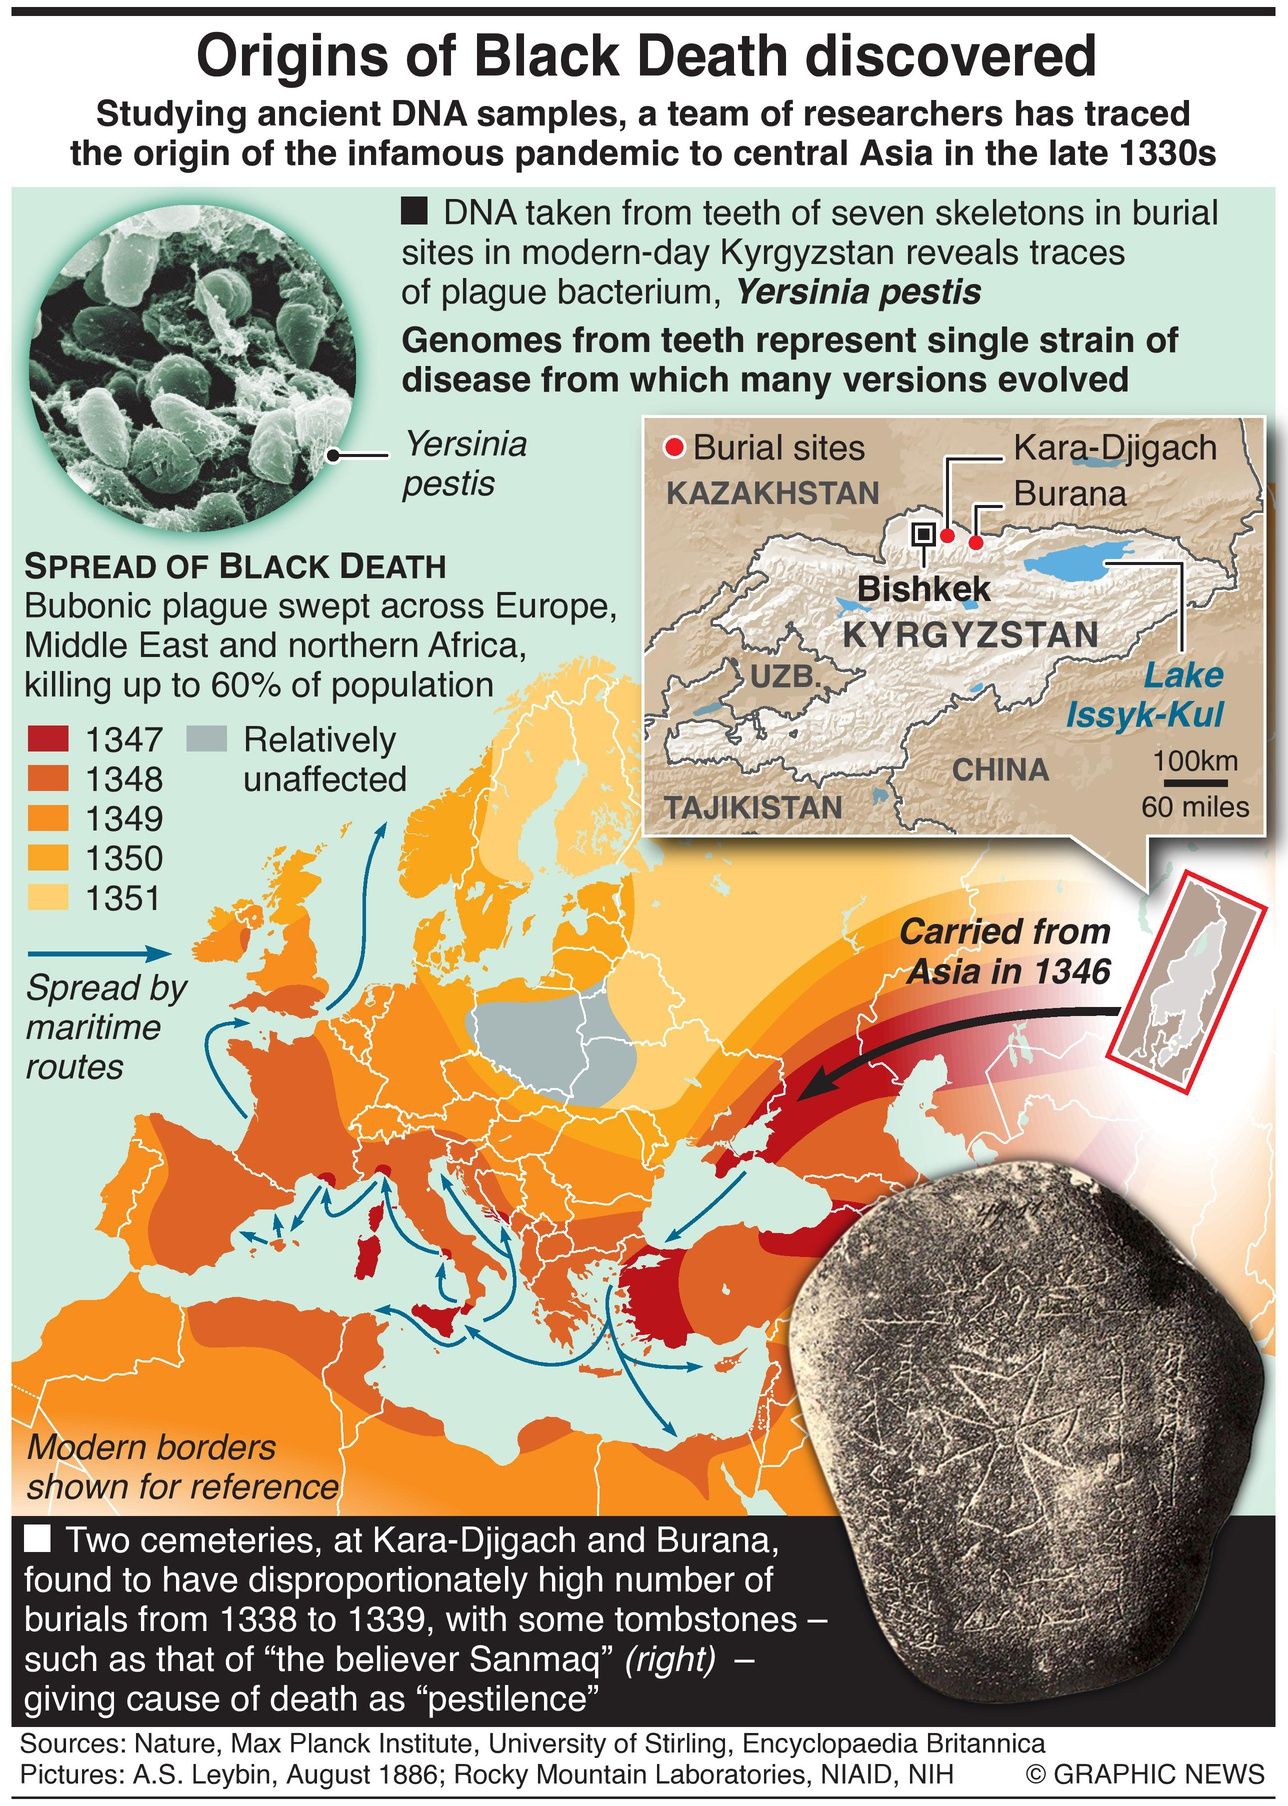 Origin of the Black Death, Traced back to Kyrgystan, Infographic provided by Graphic News, designed by JORDI BOU